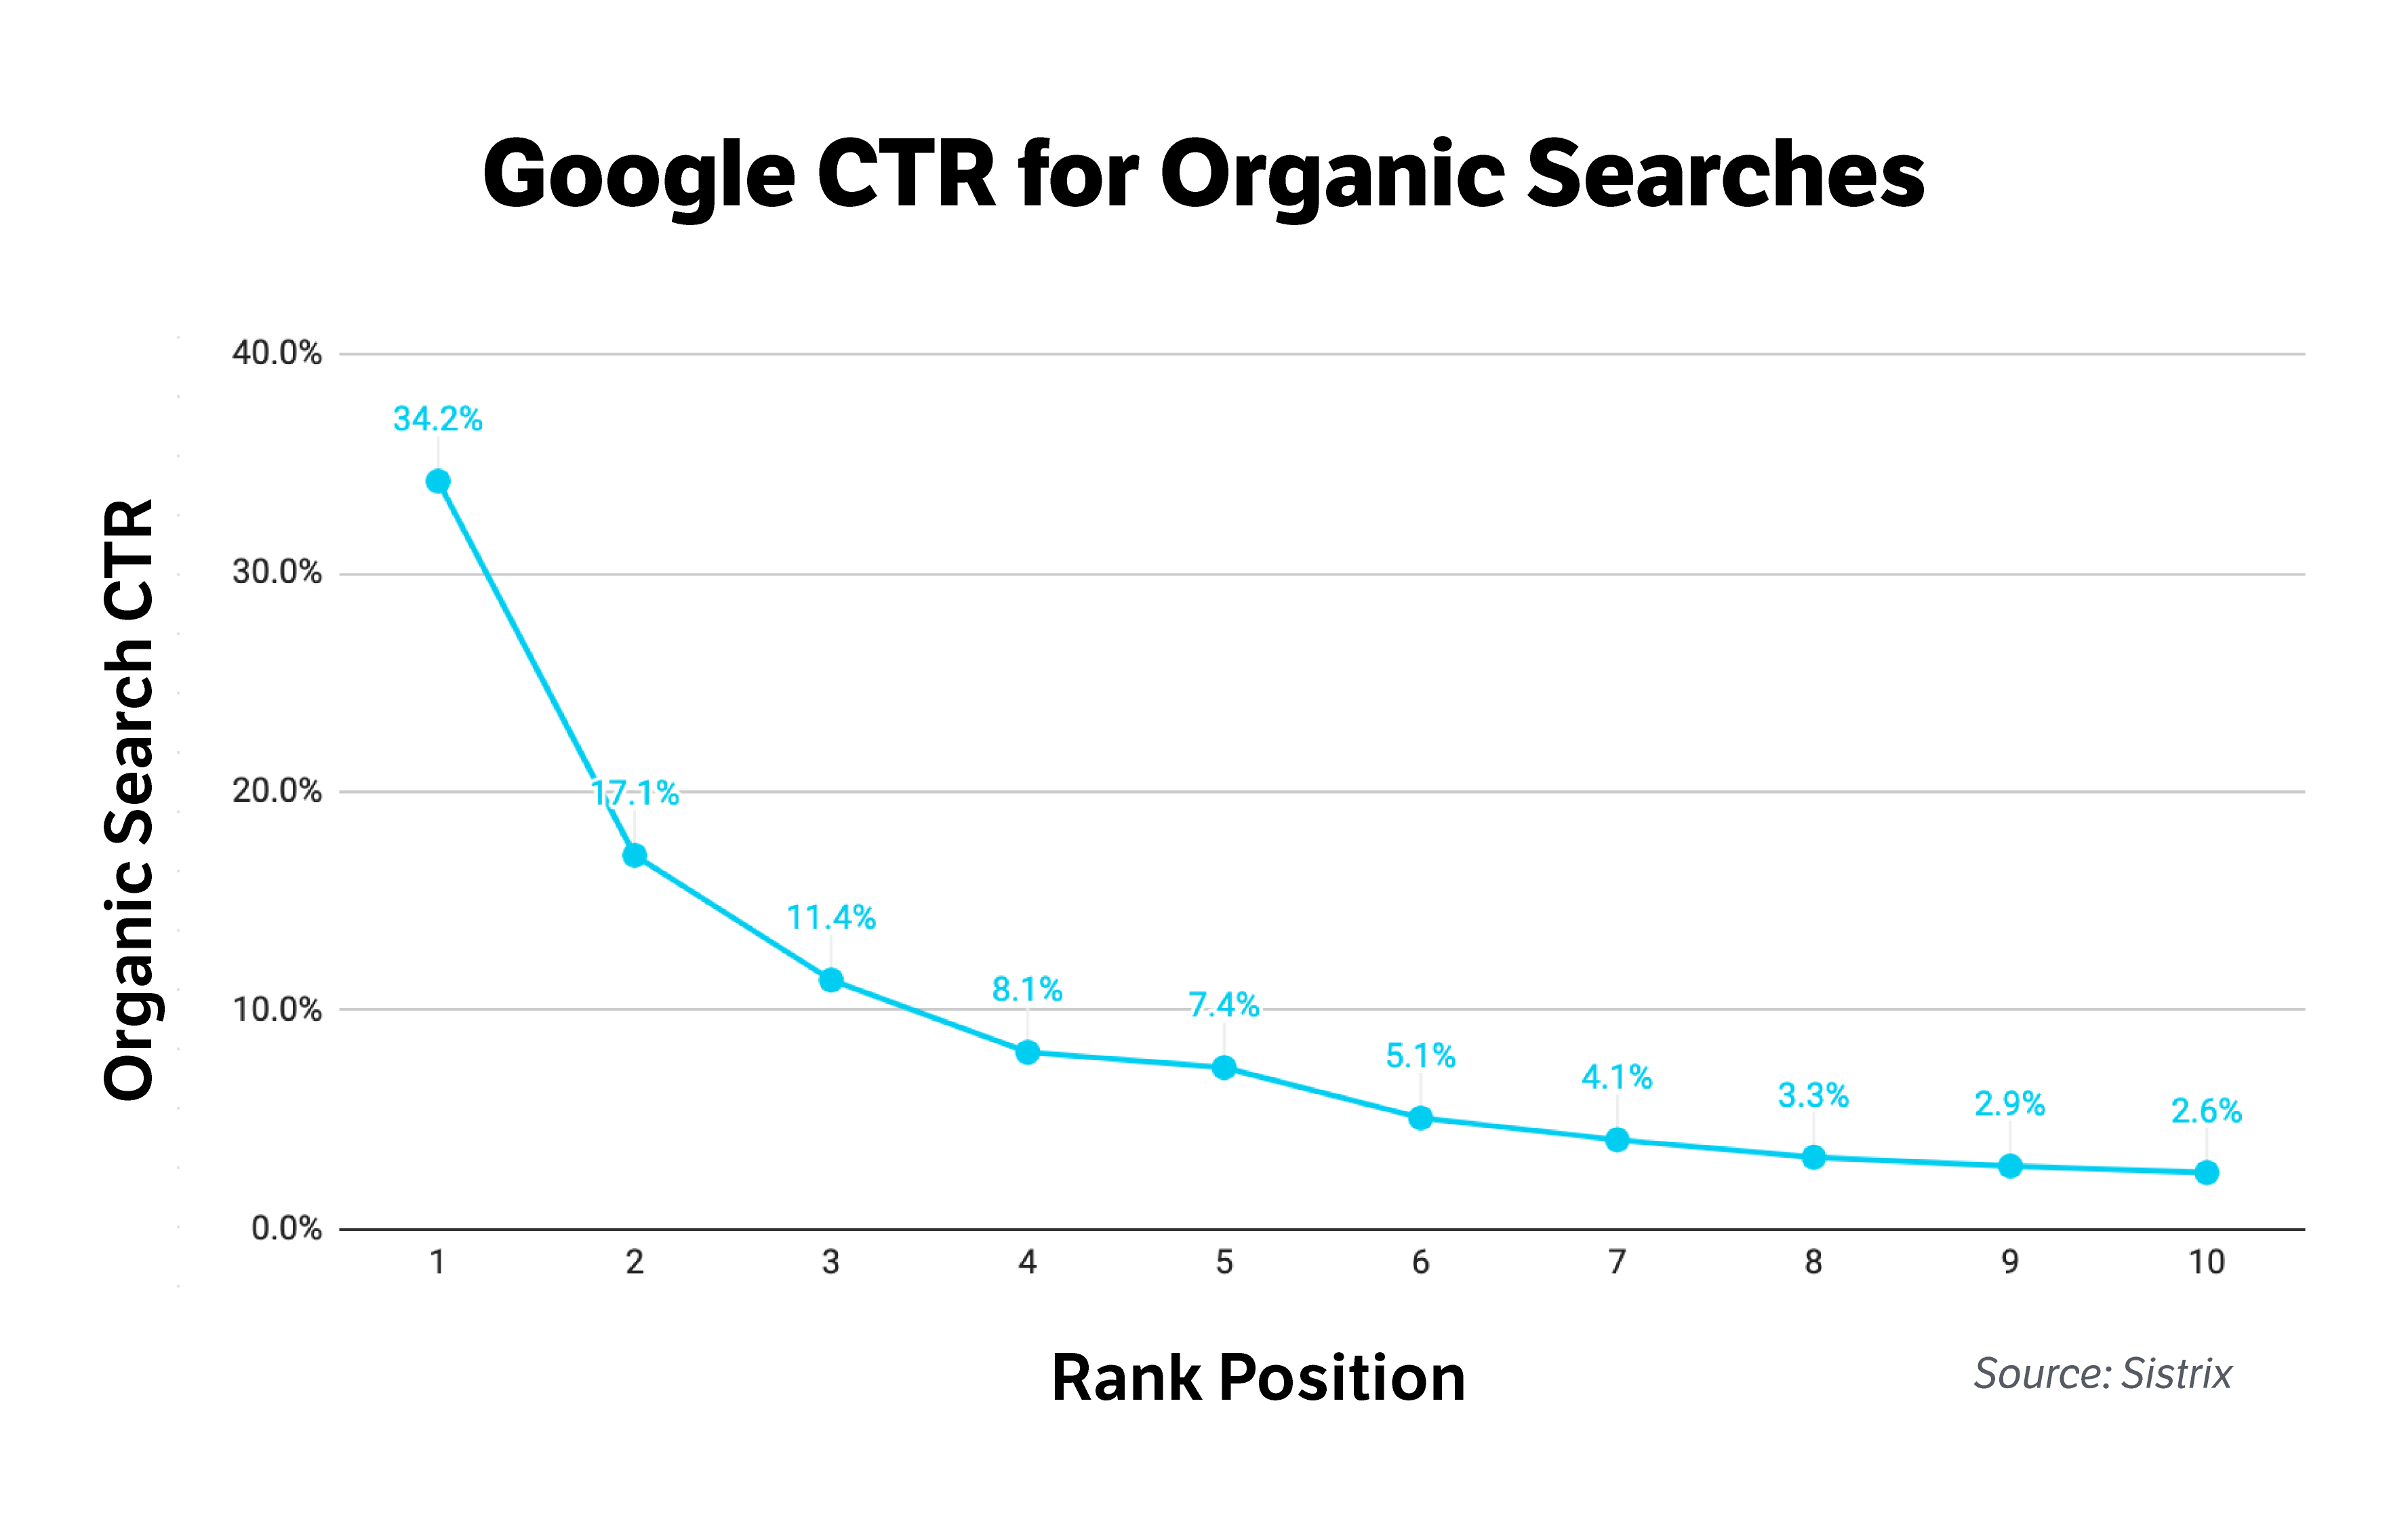 Google CTR for Organic Searches